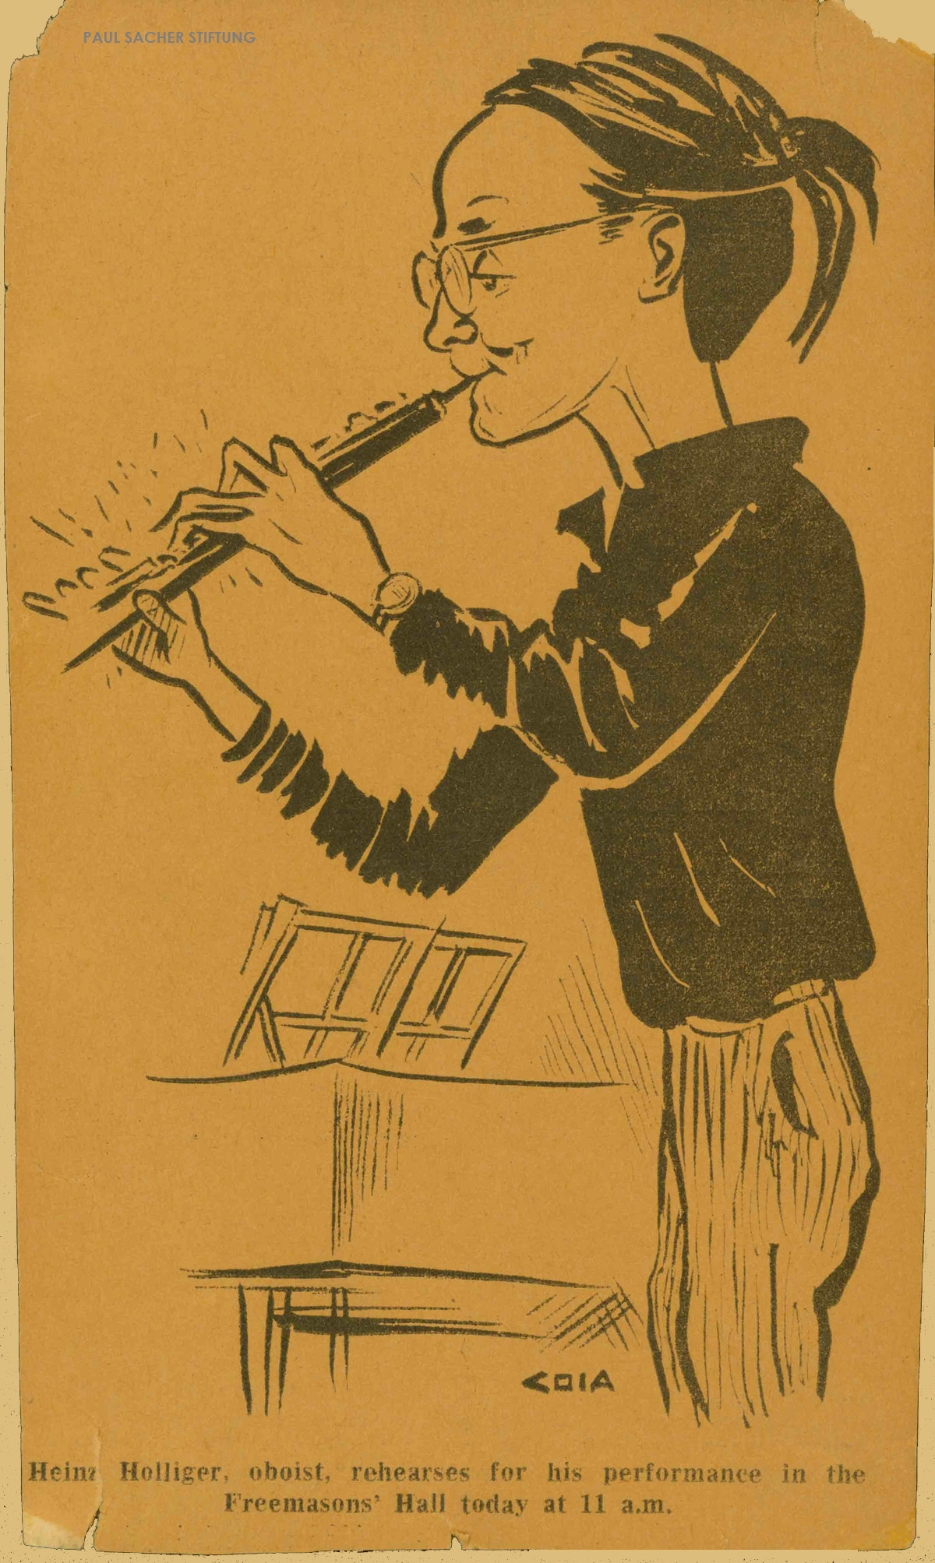 Caricature from Edinburgh, early 1960s (Heinz Holliger Collection, PSS)